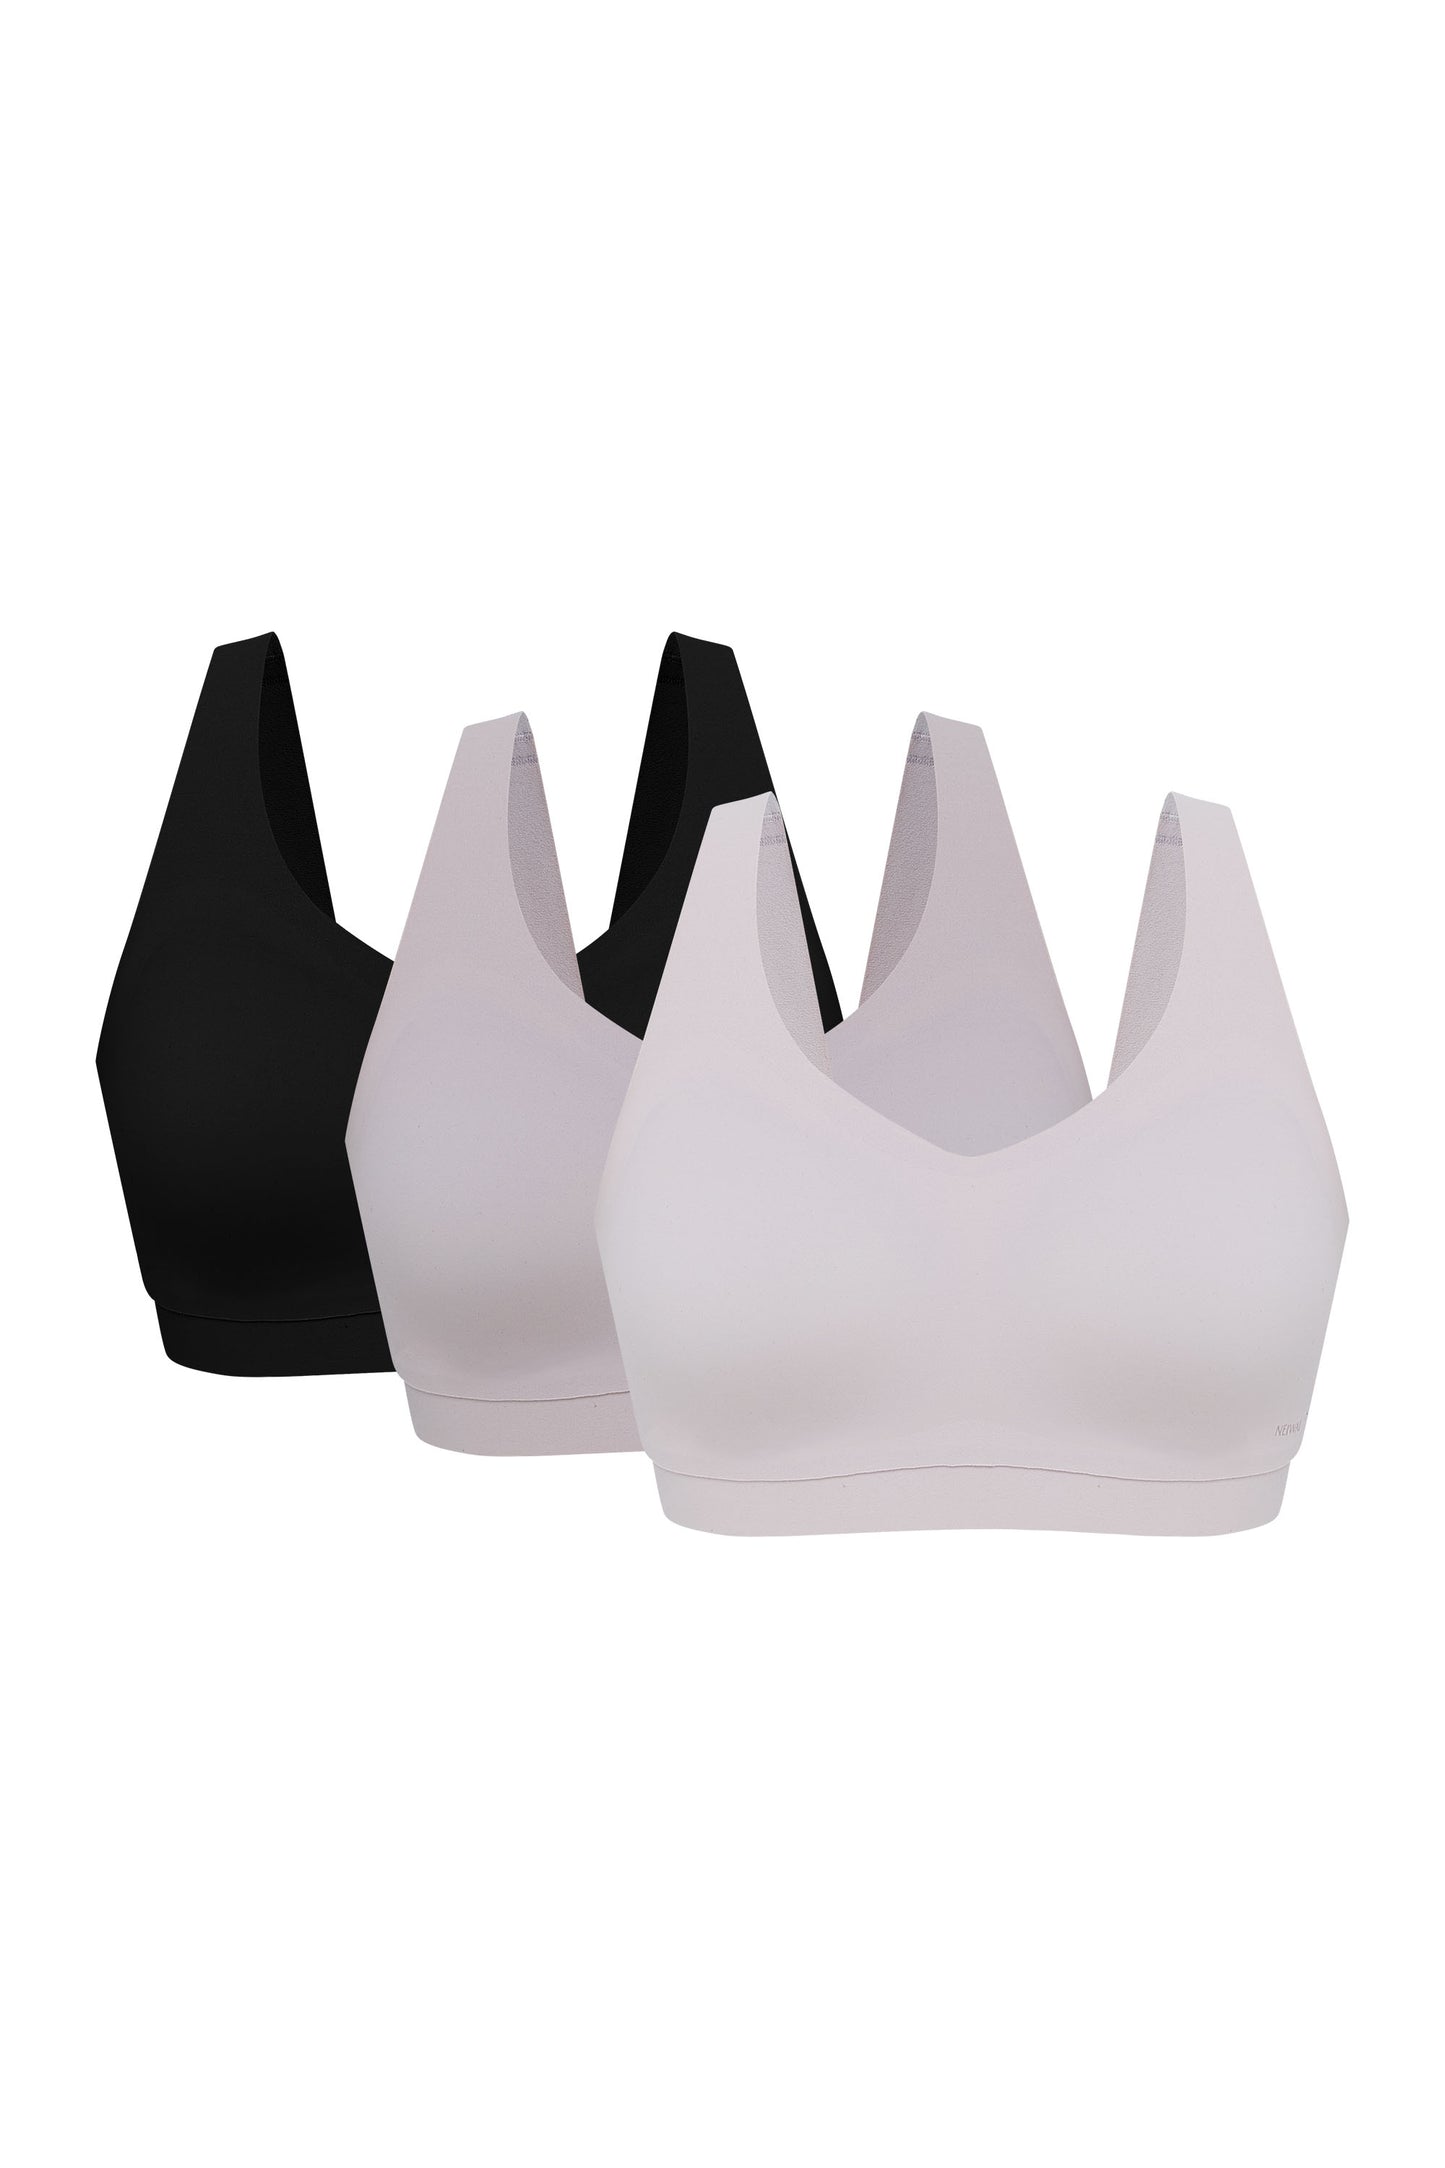 three bras in black, light pink, and off white